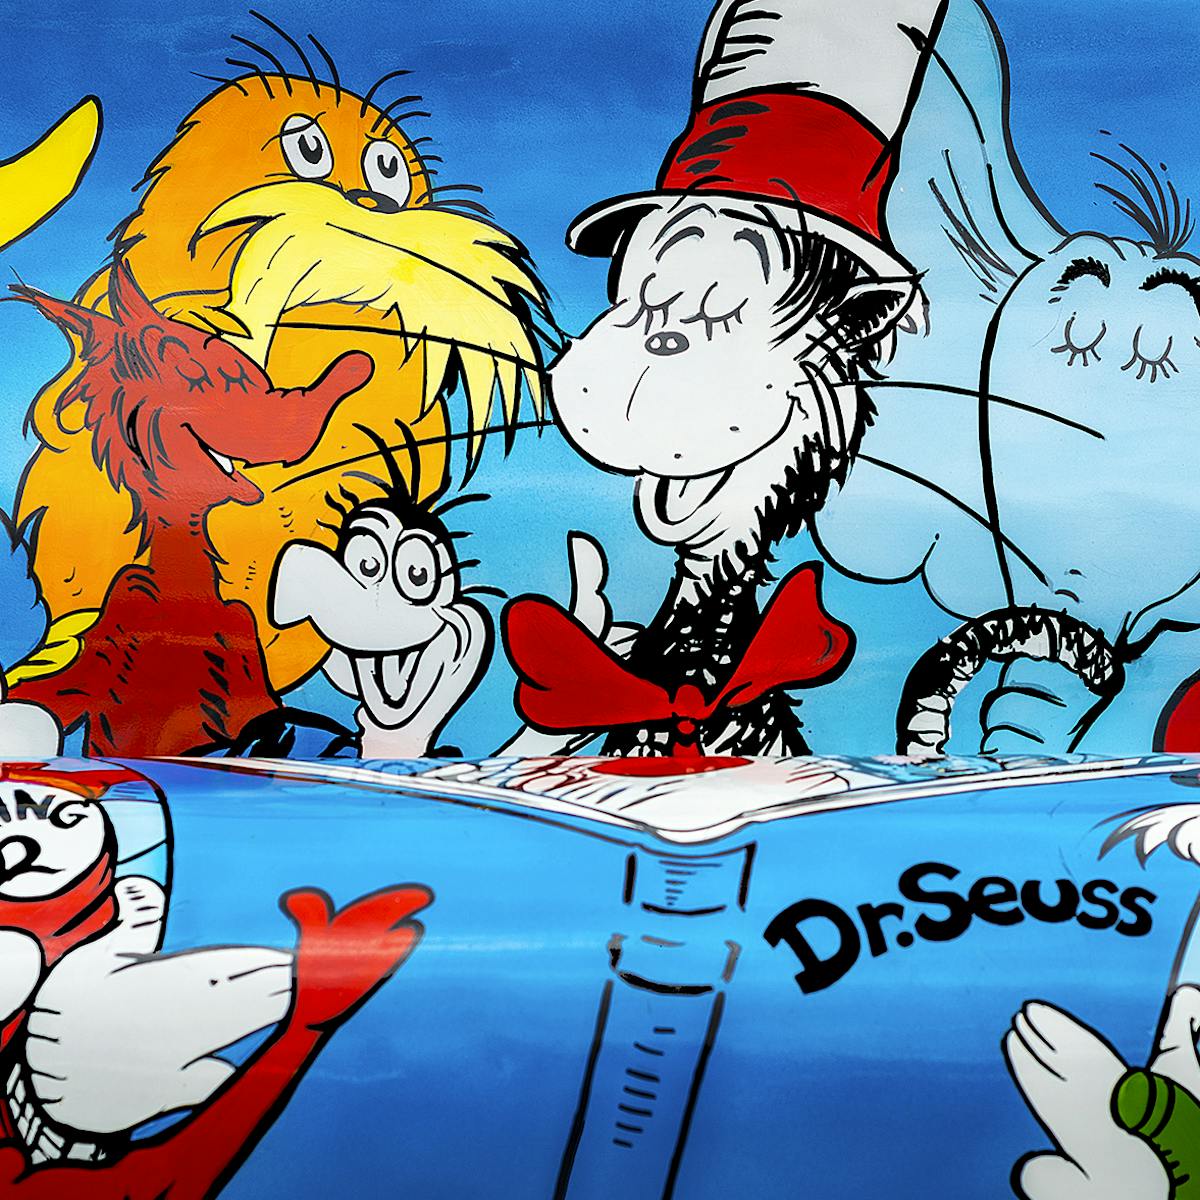 In Dr Seuss' children's books, a commitment to social justice that remains  relevant today